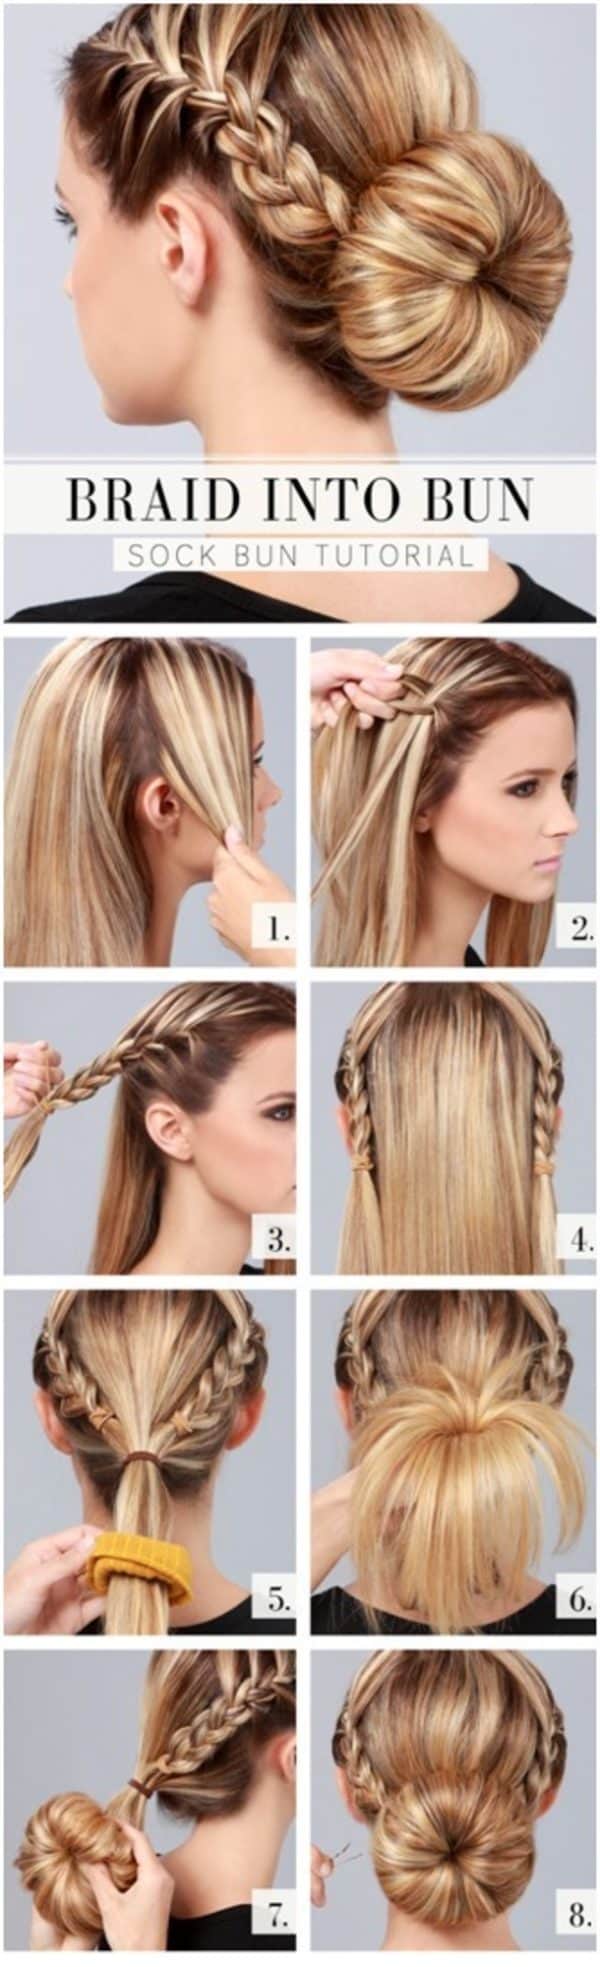 Quick And Easy Hairstyle Tutorials For The Times You Are Too Busy To Visit A Hair Dresser